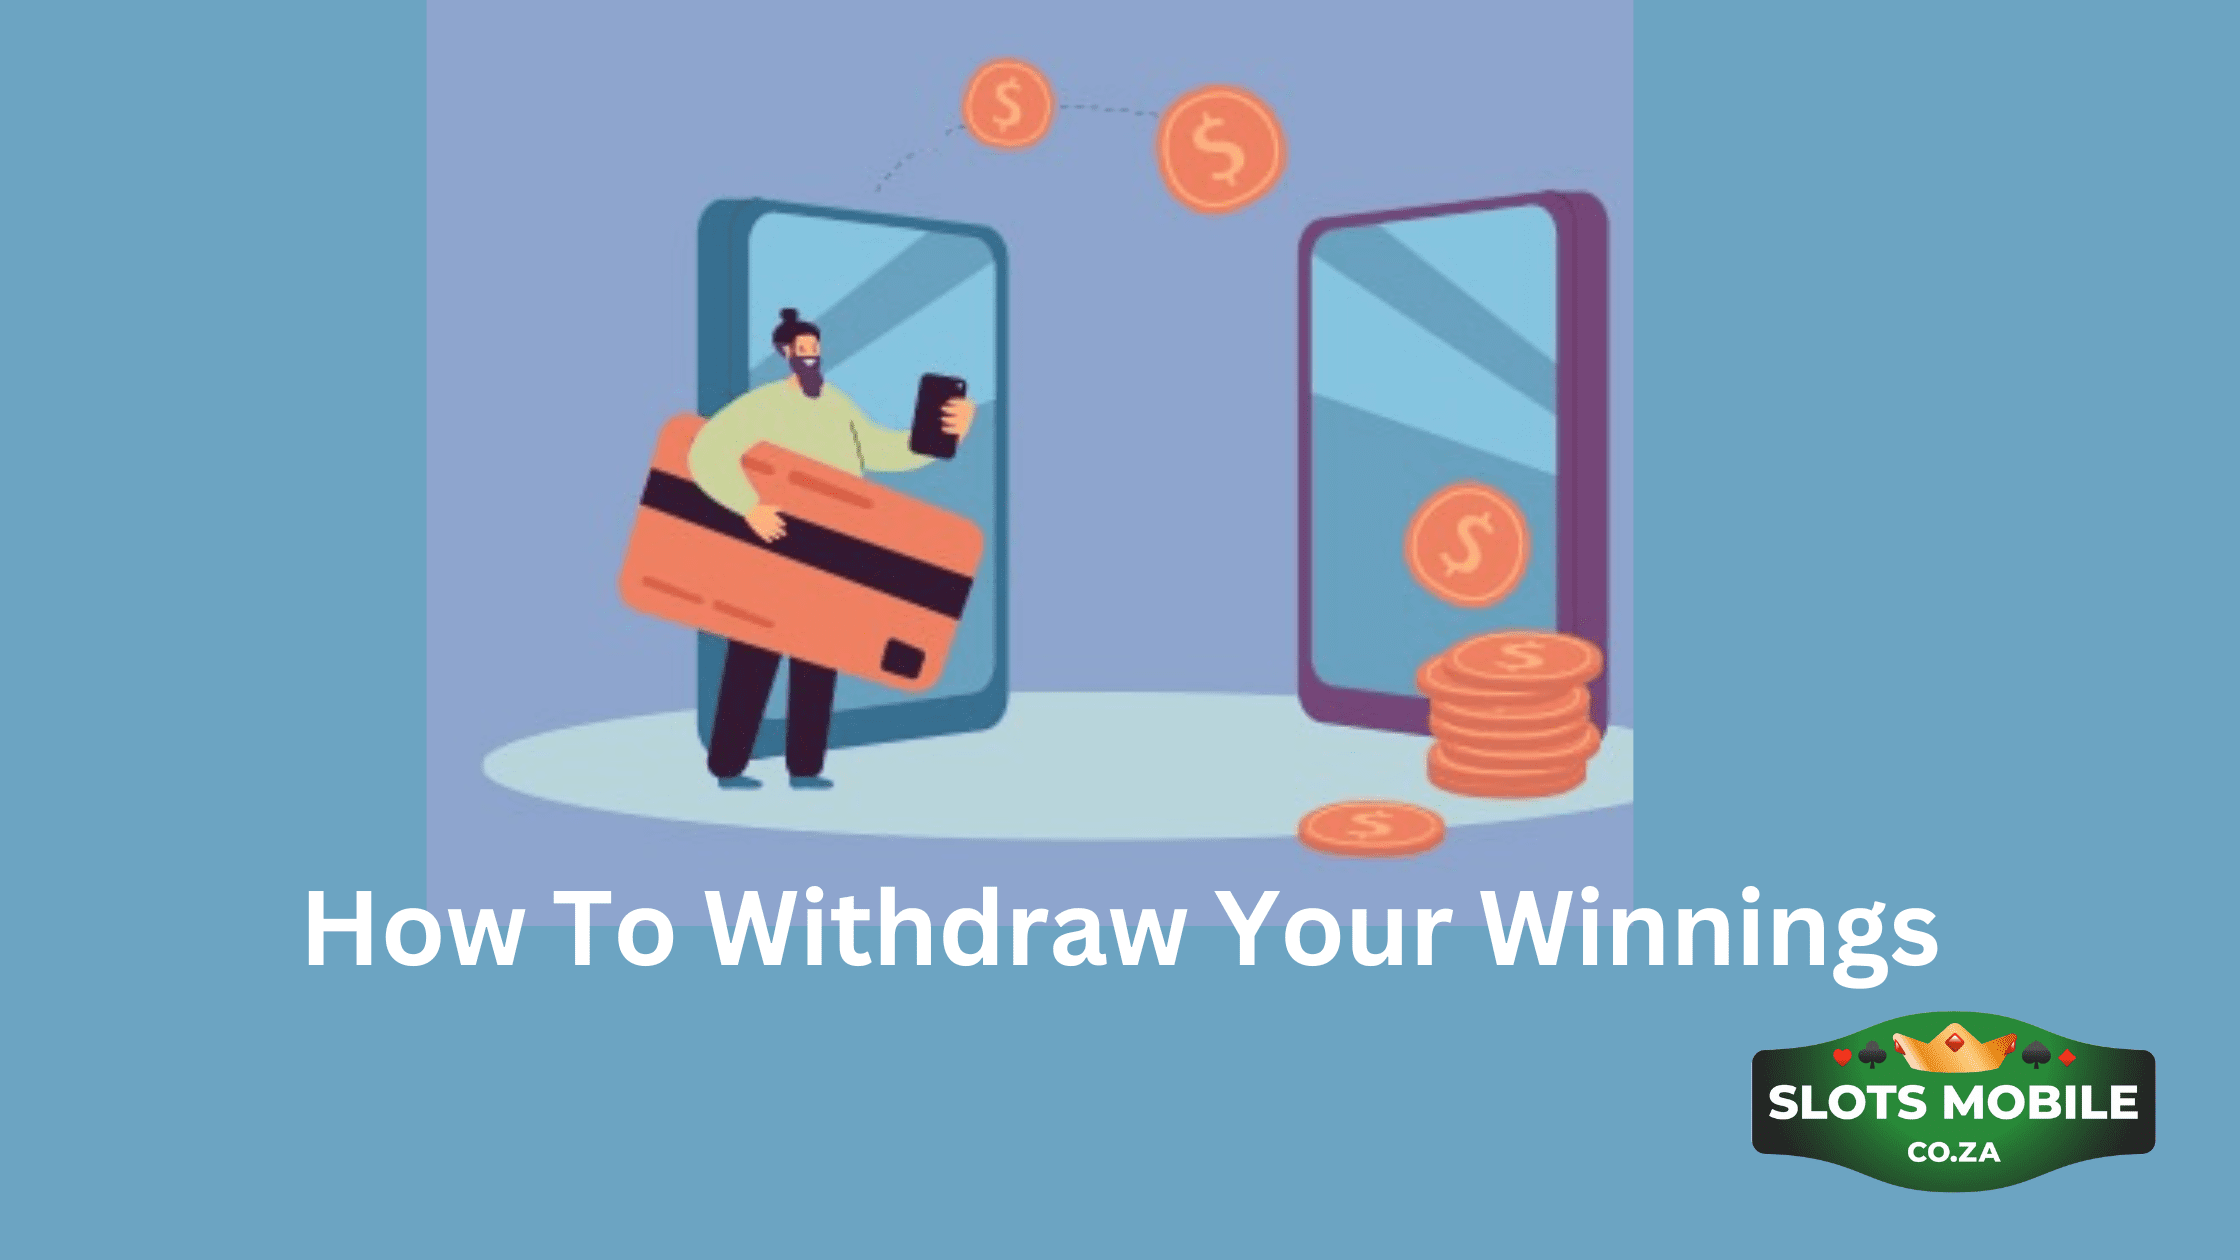 How To Withdraw Your Winnings